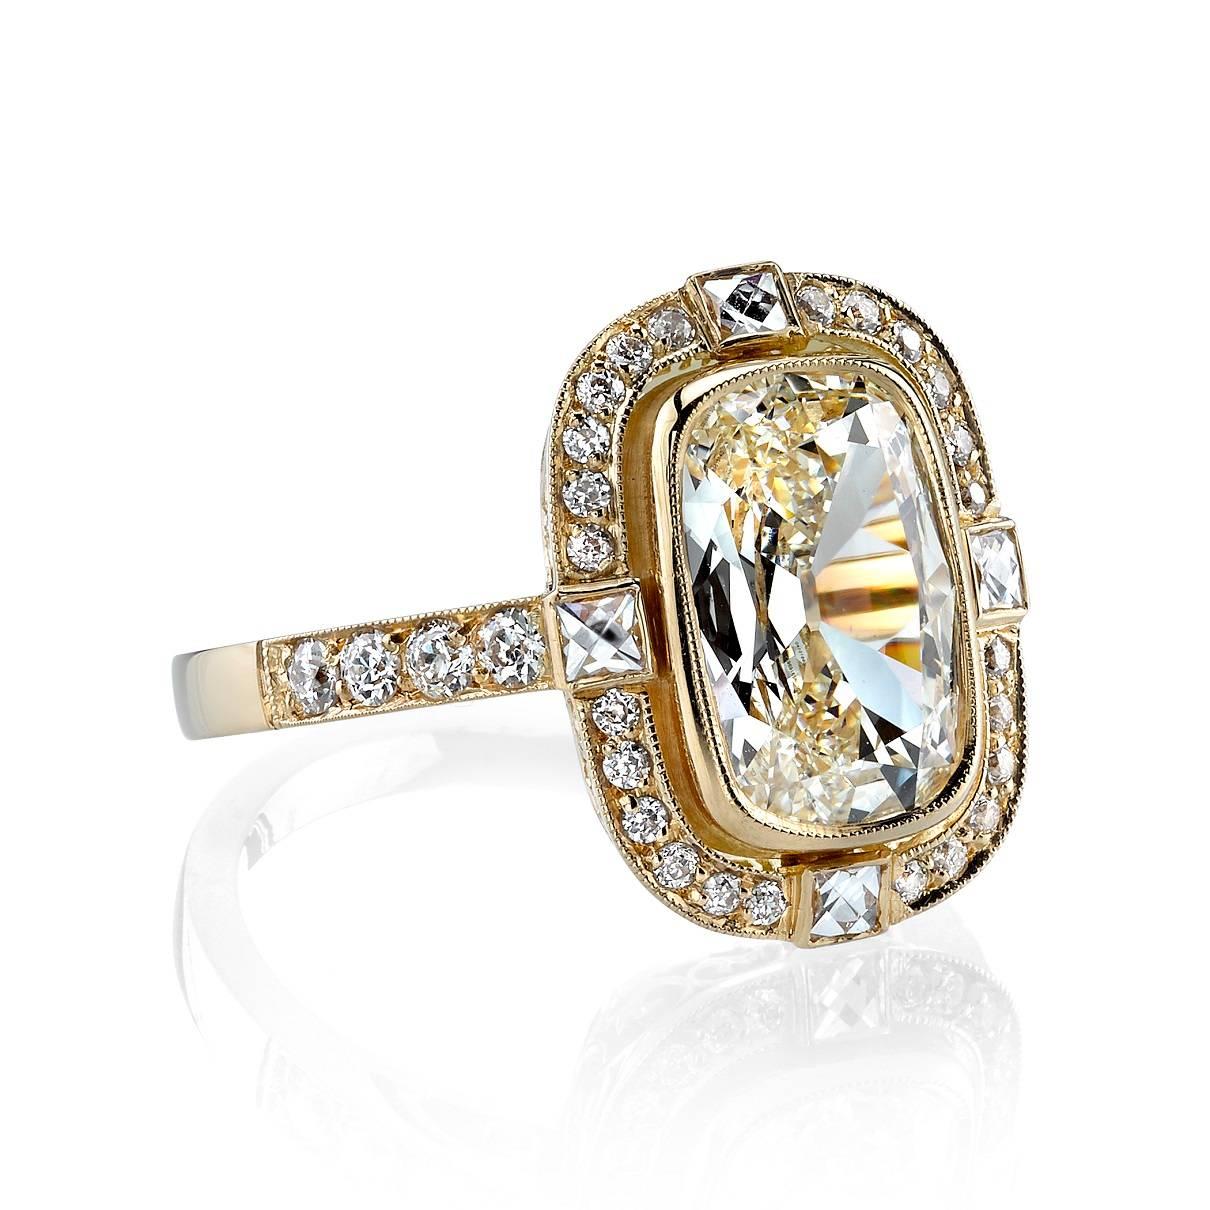 2.52ct J/VS1 Cushion cut diamond EGL certified and set in a handcrafted 18k yellow gold mounting. An Art Deco design featuring a French cut and old European cut diamond halo.